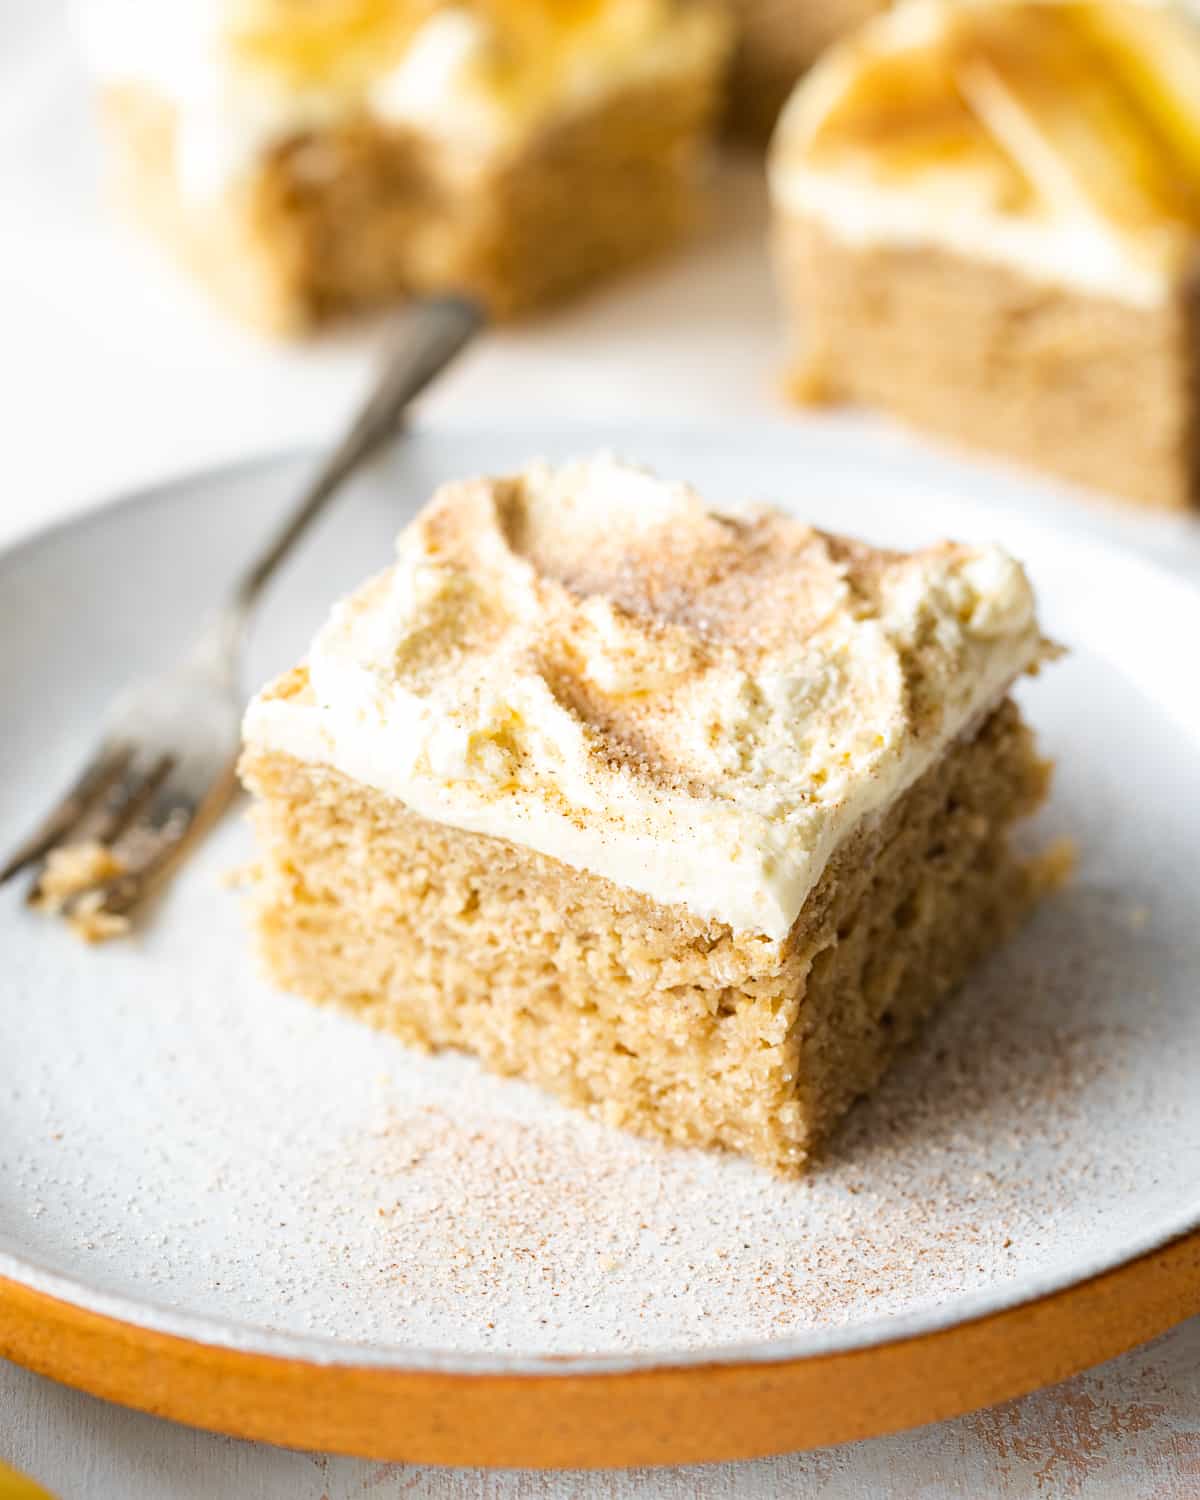 slice of banana cake with cream cheese frosting and cinnamon on a ceramic plate.